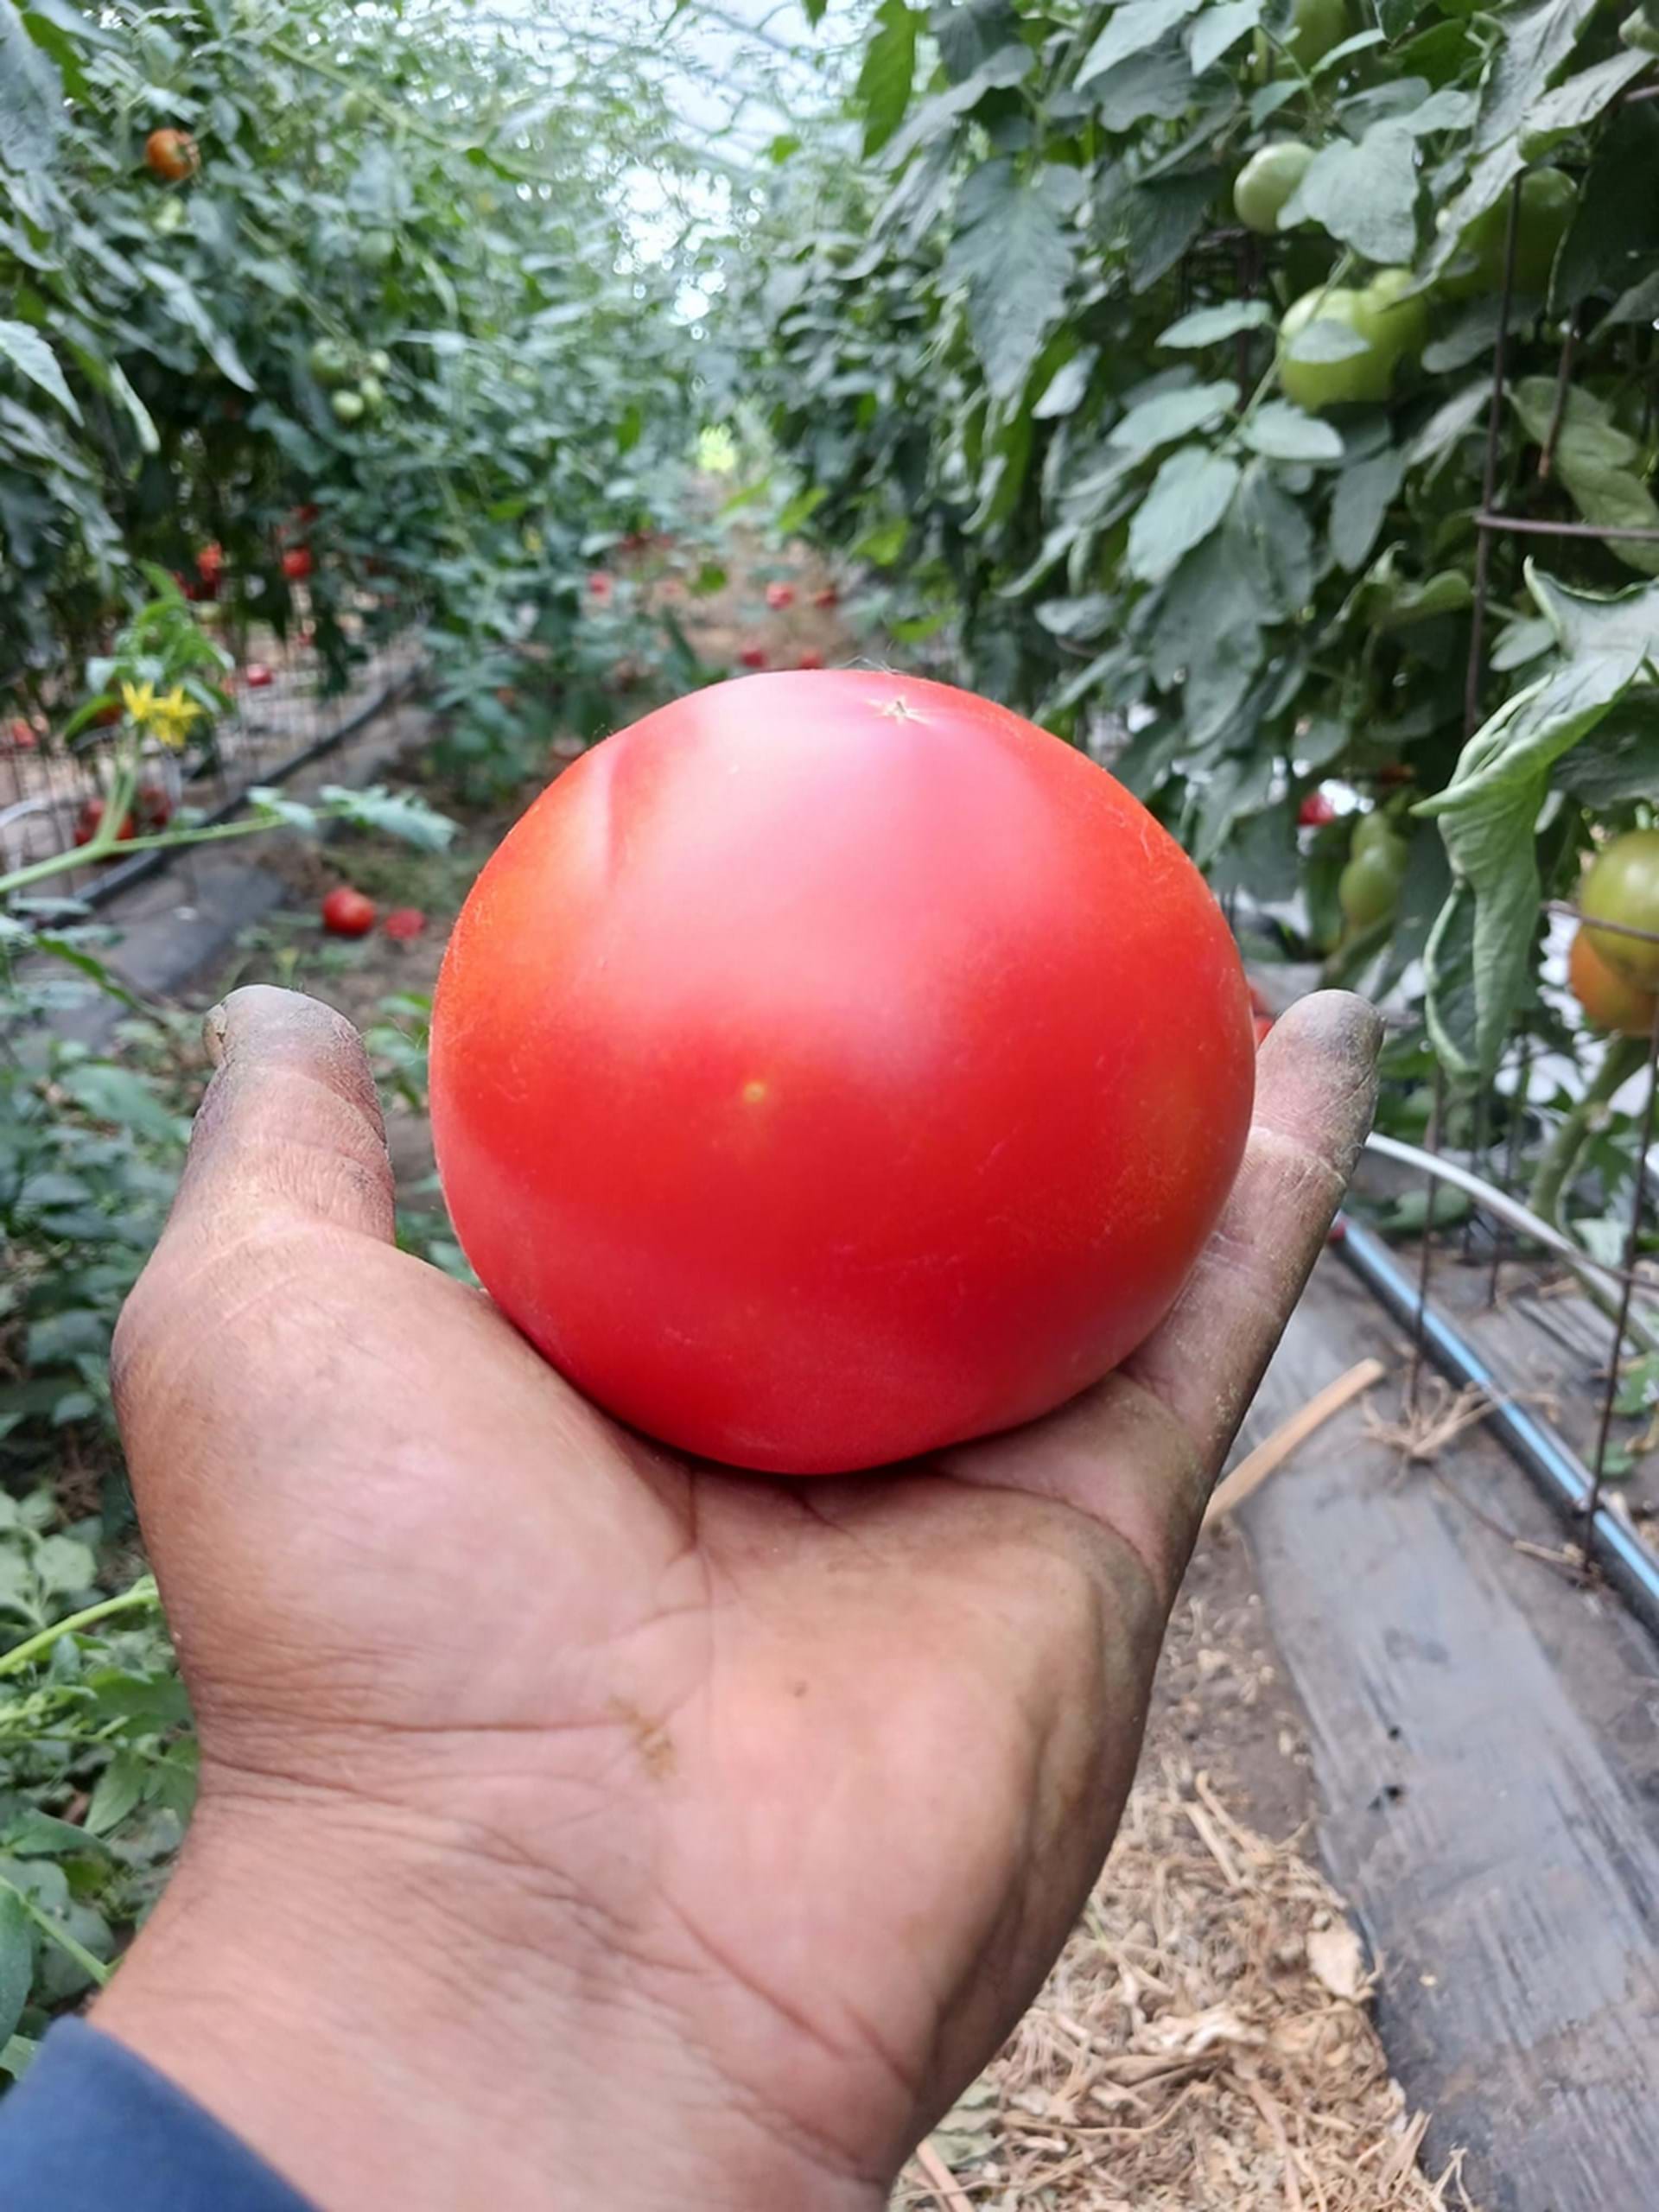 Picked tomato in the field